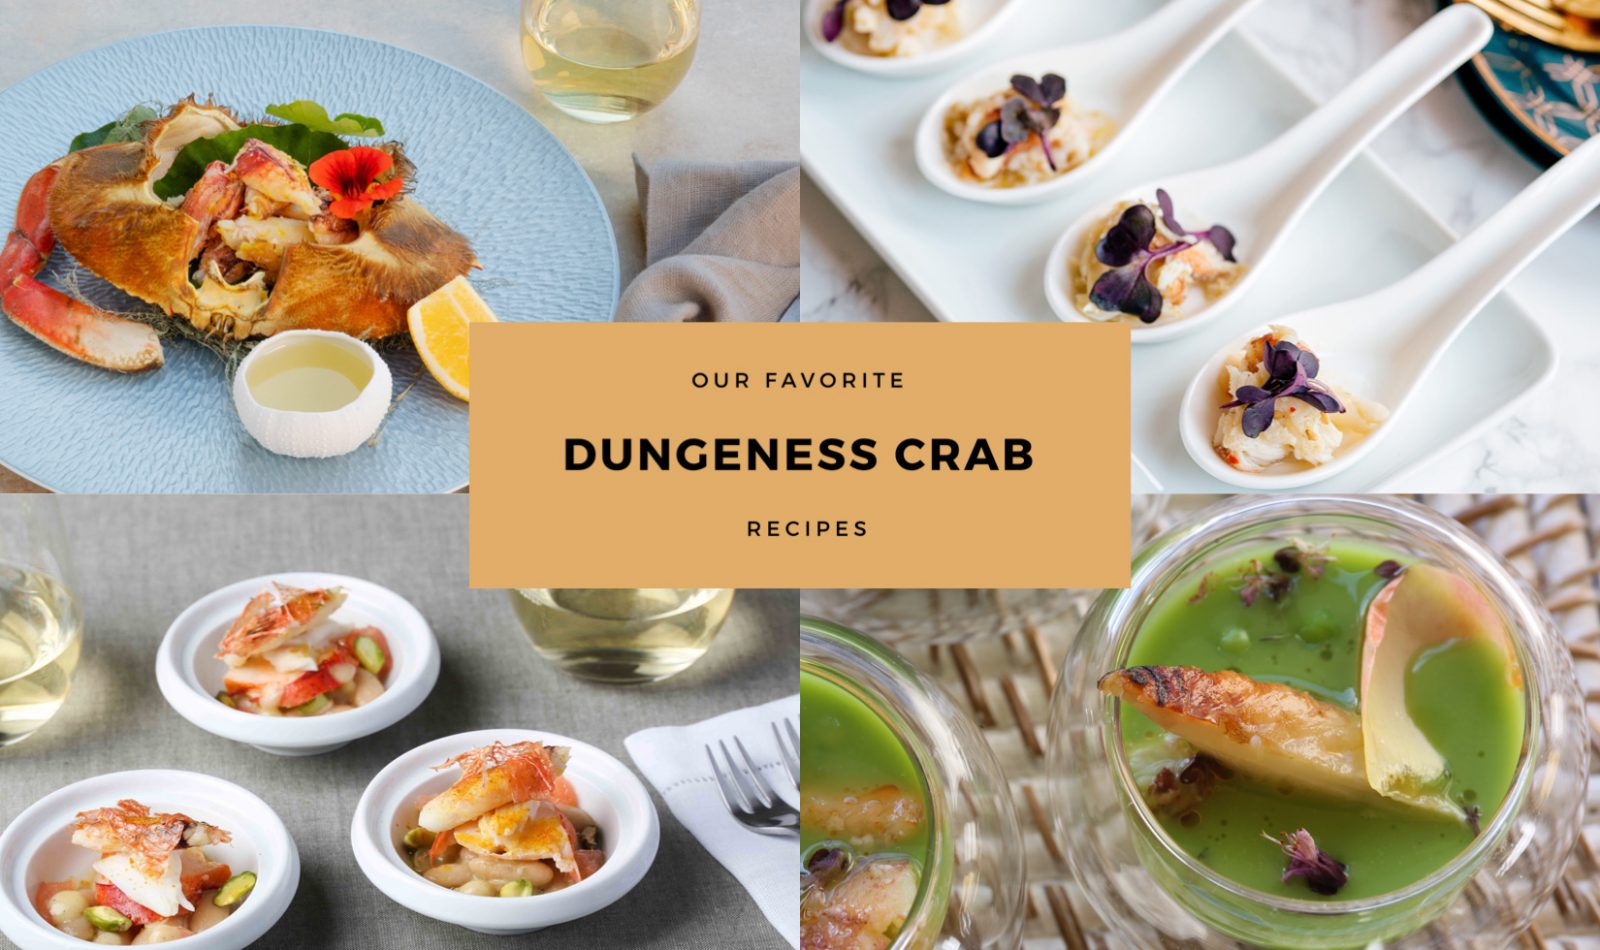 Four photos of Jordan Winery Dungeness crab dishes with image text "our favorite Dungeness crab recipes"